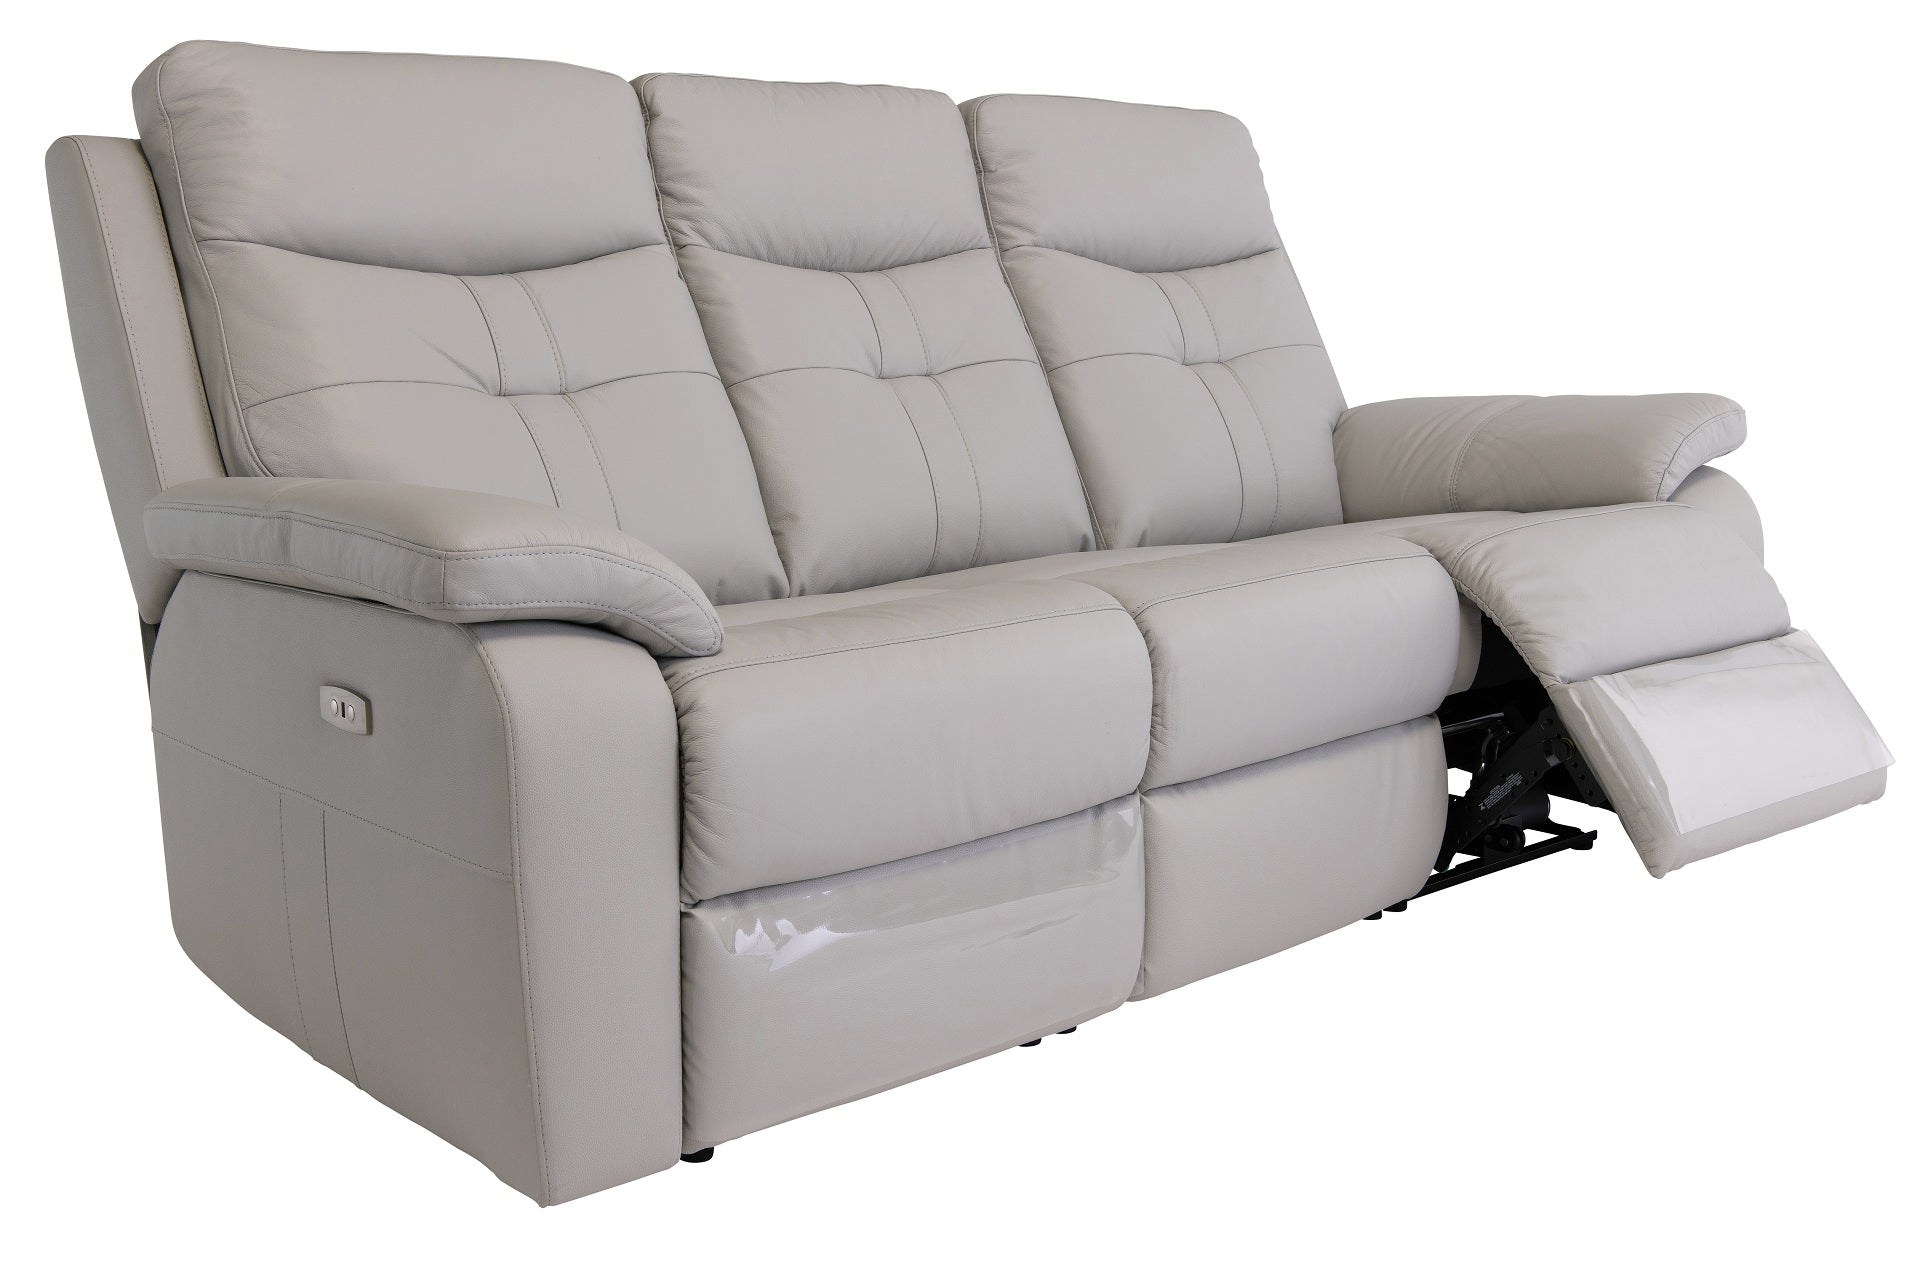 Sonia Leather Electric 3 Seater Recliner